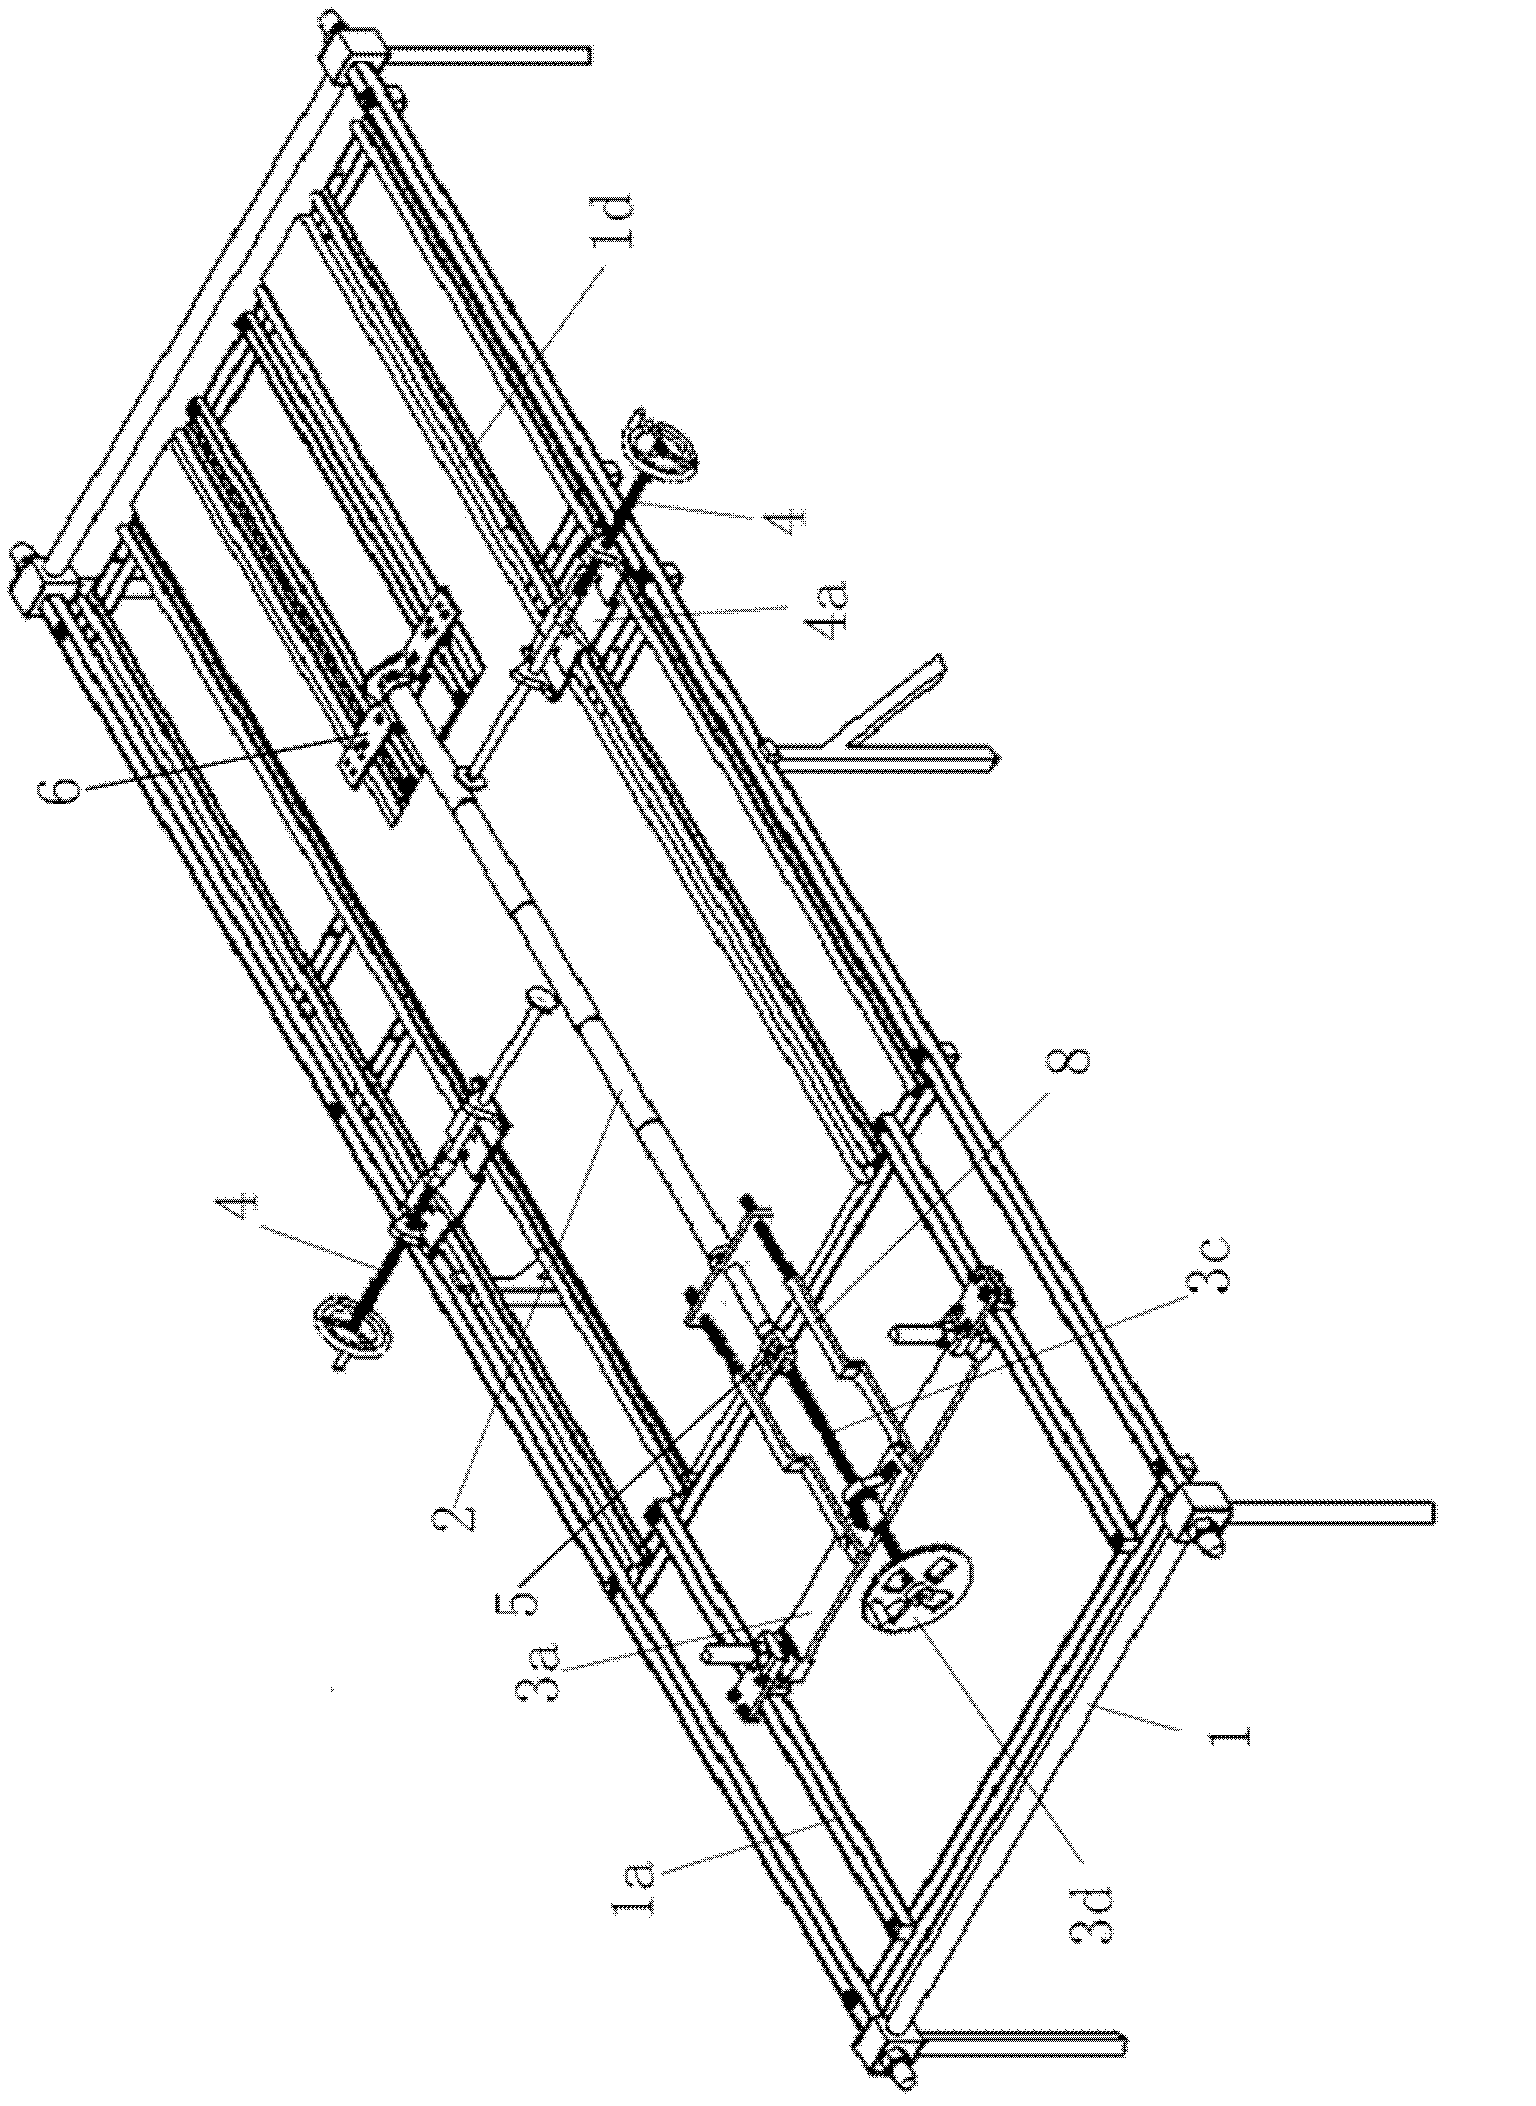 Double-layer pipe overall buckling simulation experiment device and method